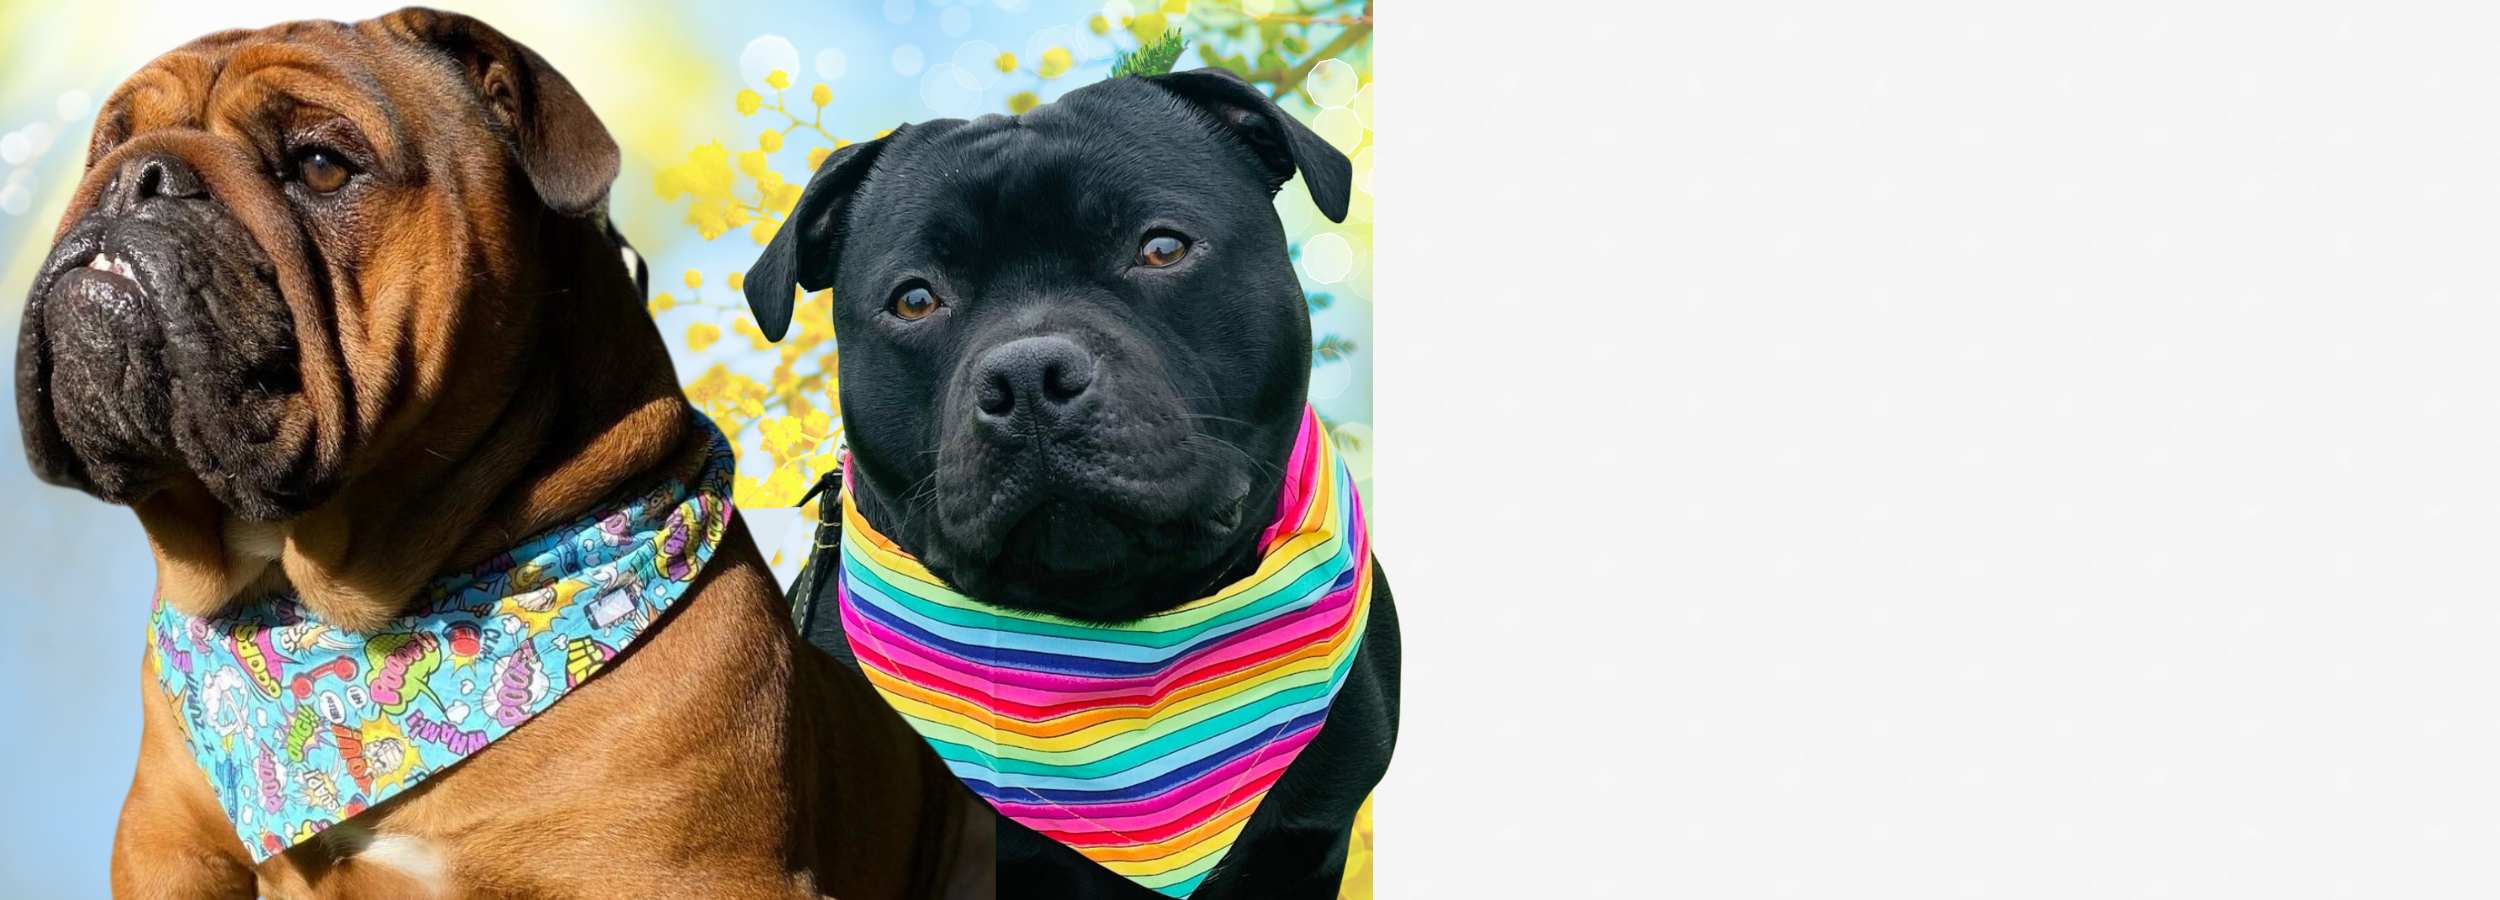 bulldog and staffie wearing brightly coloured spring bandanas